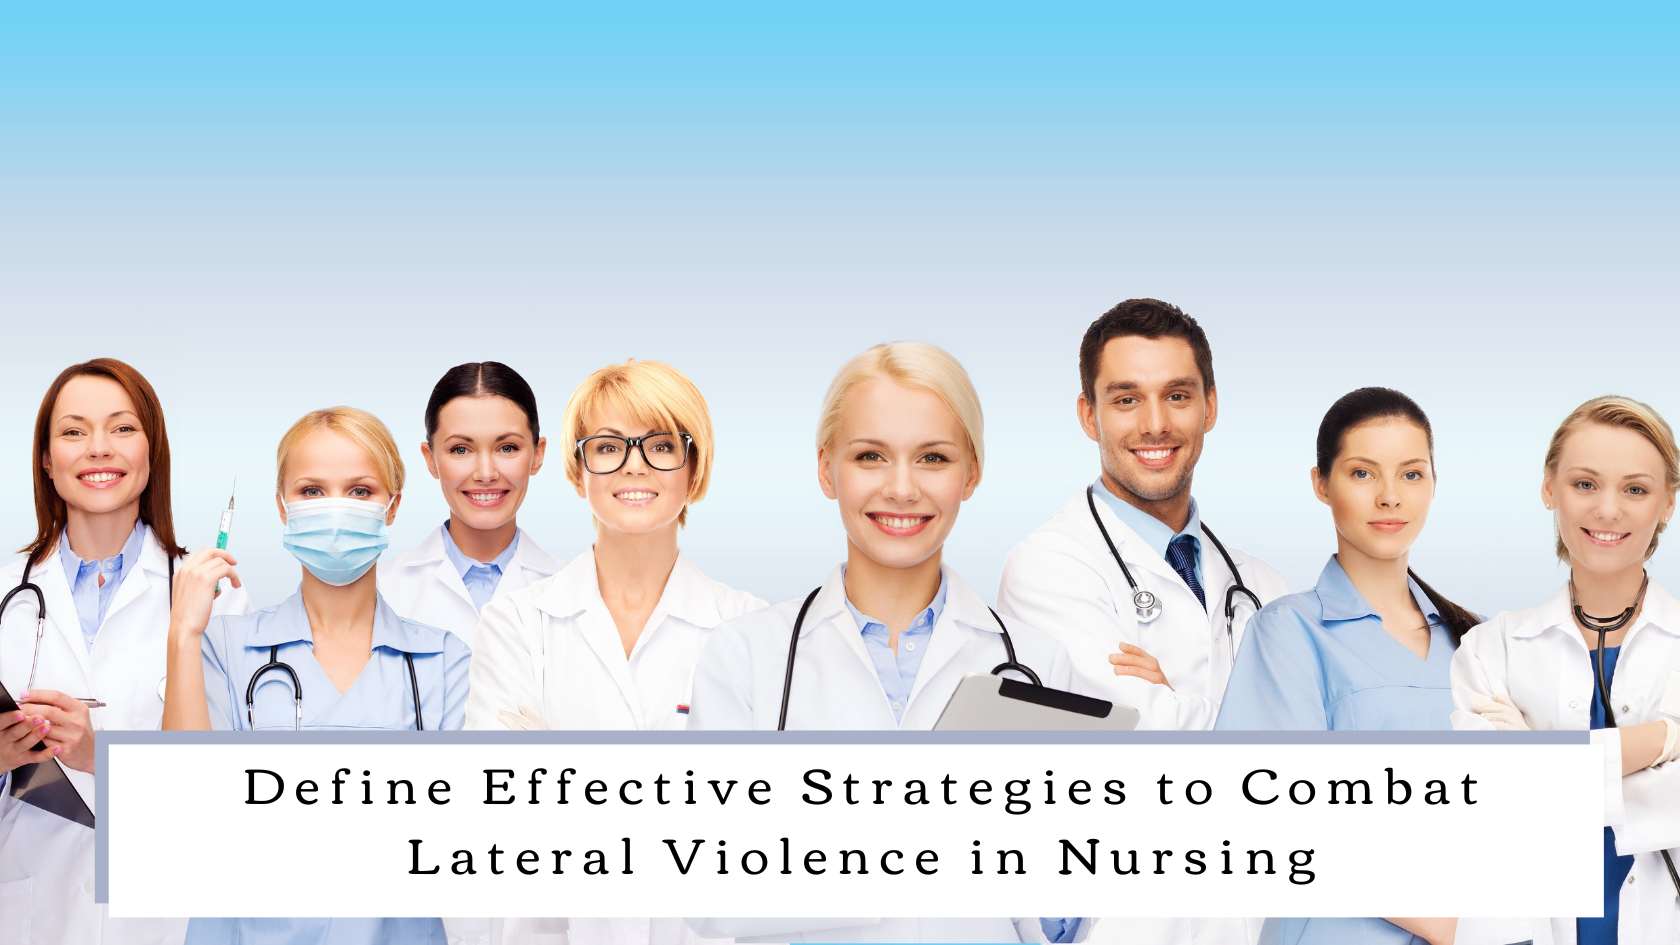 Define Effective Strategies to Combat Lateral Violence in Nursing